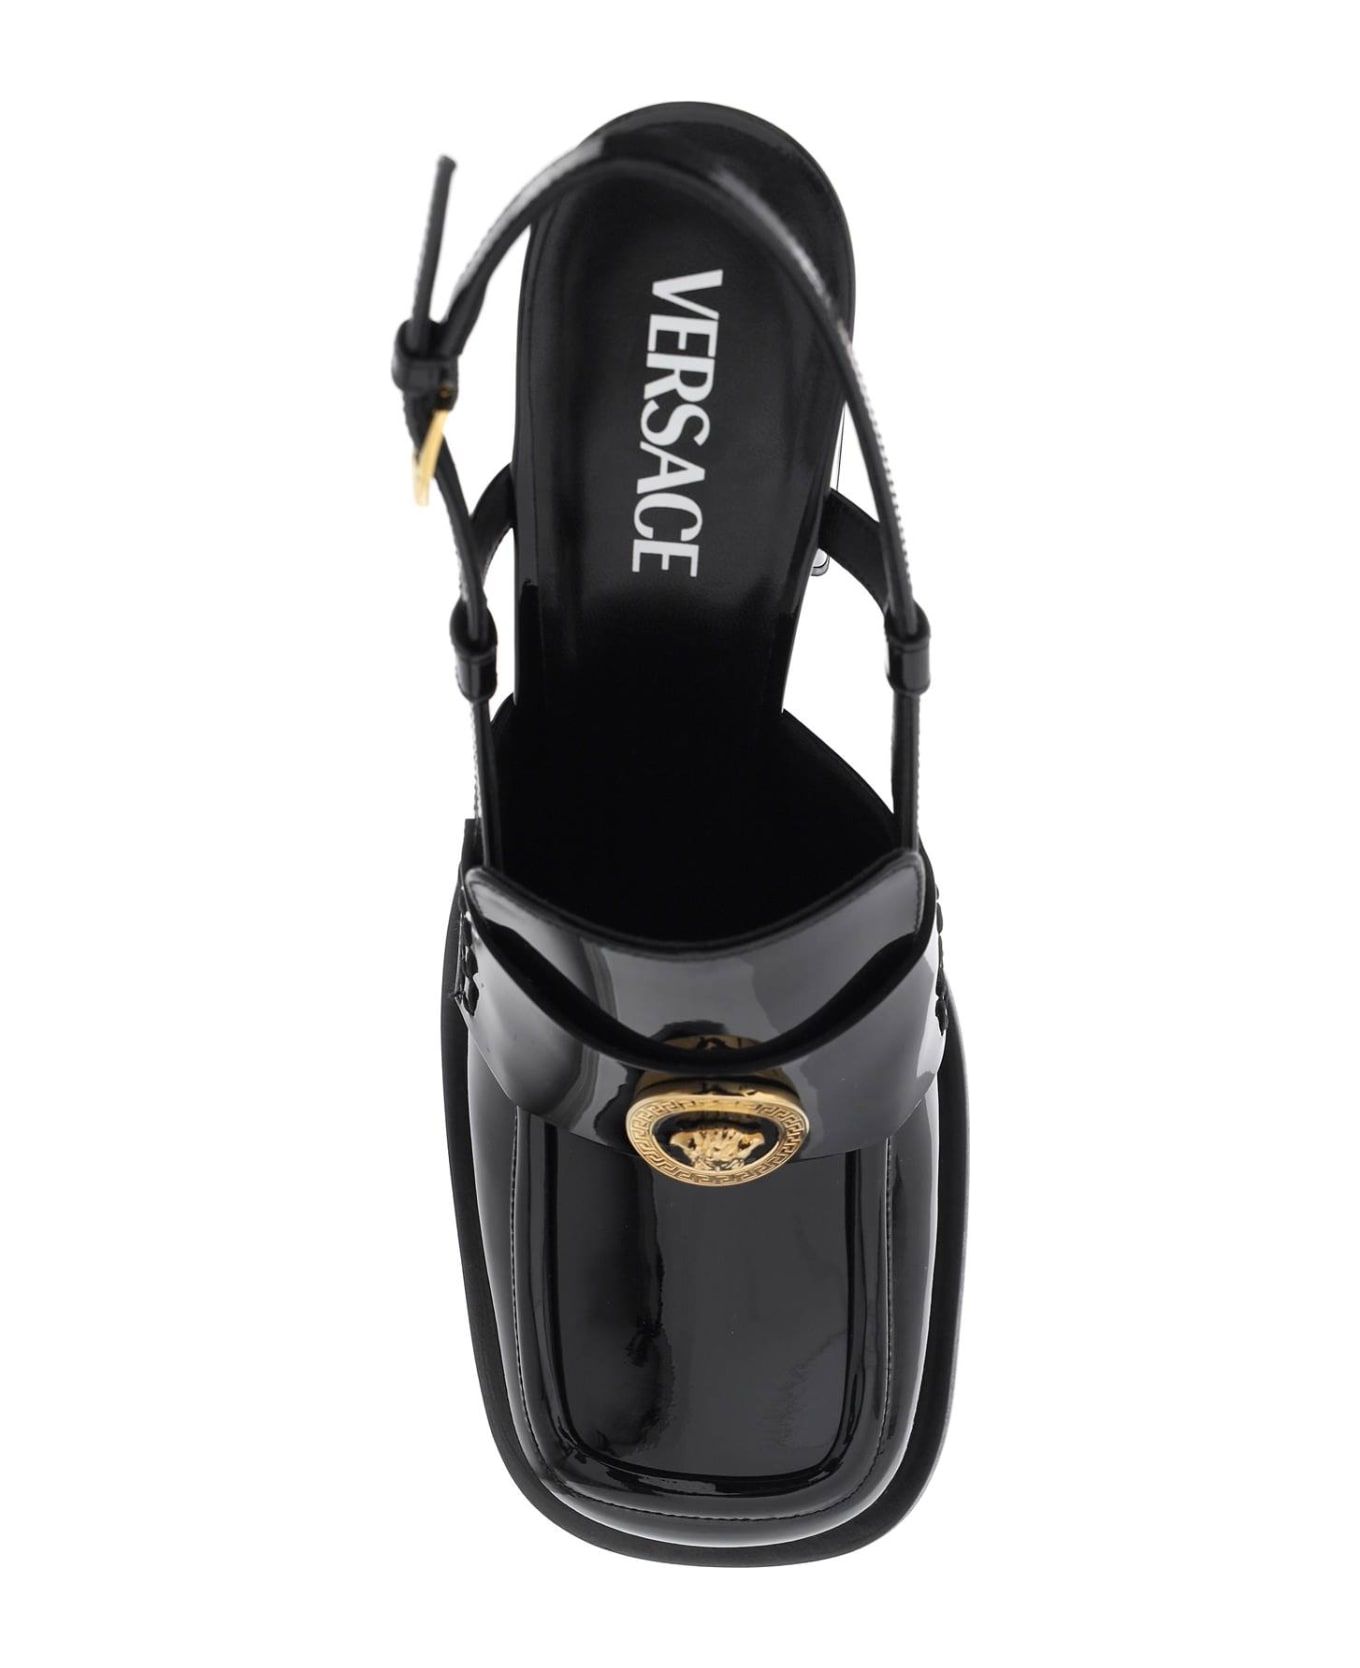 Versace Patent Leather Pumps Loafers - BLACK VERSACE GOLD (Black)